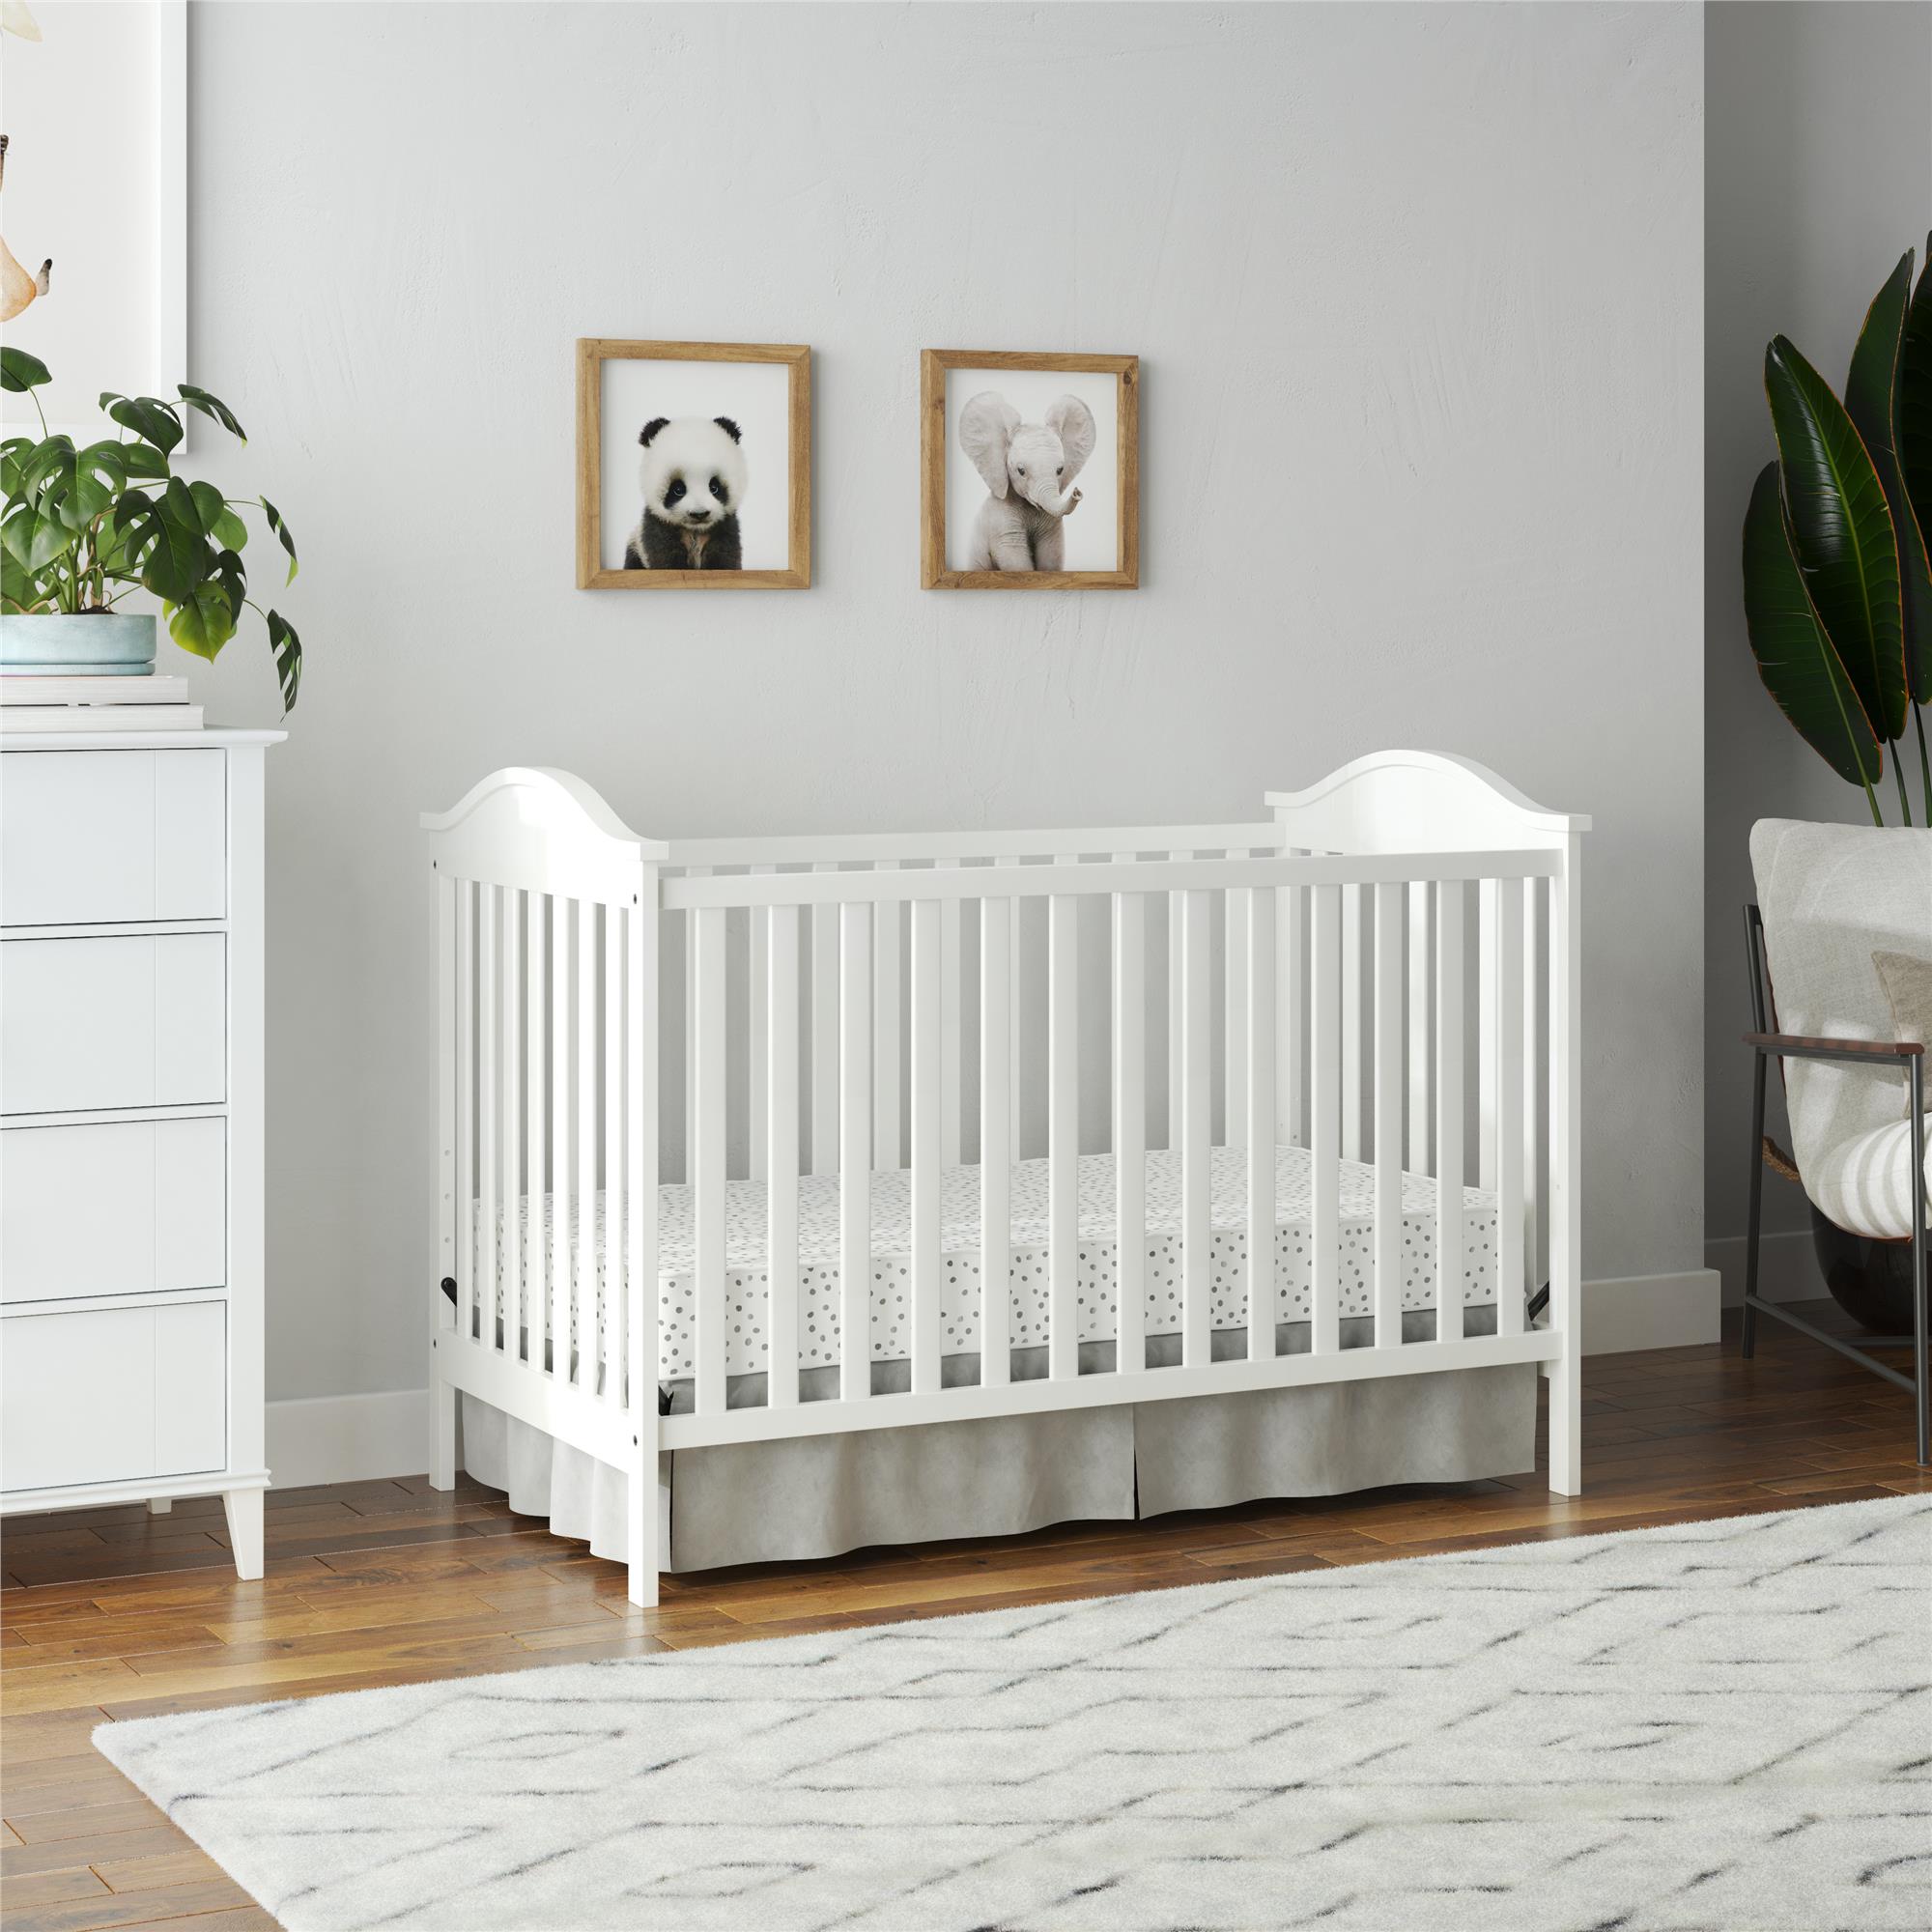 Baby Relax Adele 3-in-1 Convertible Crib, White - image 3 of 14